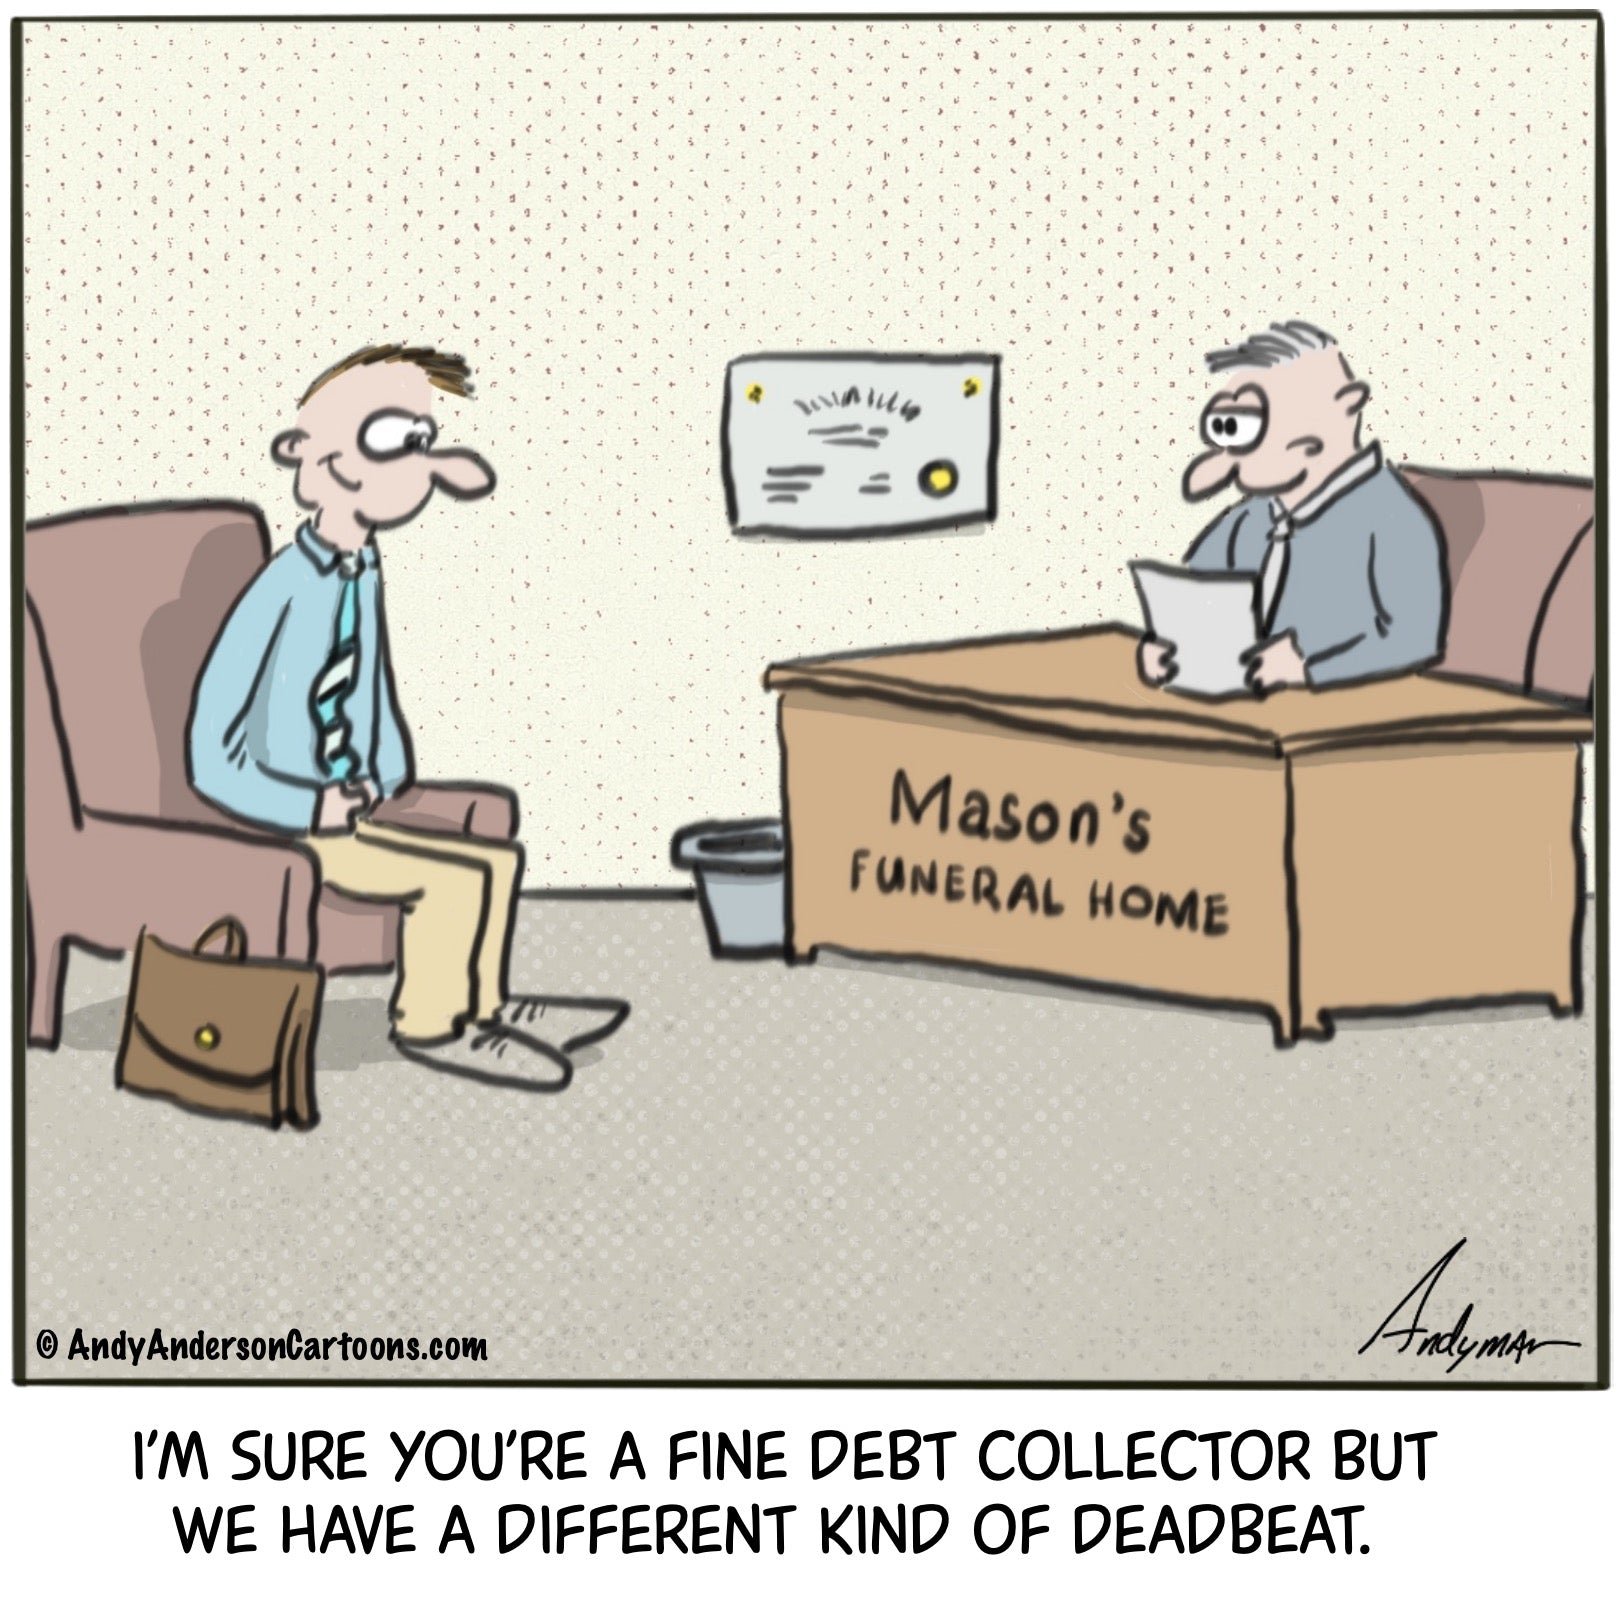 Debt collector for funeral home cartoon by Andy Anderson